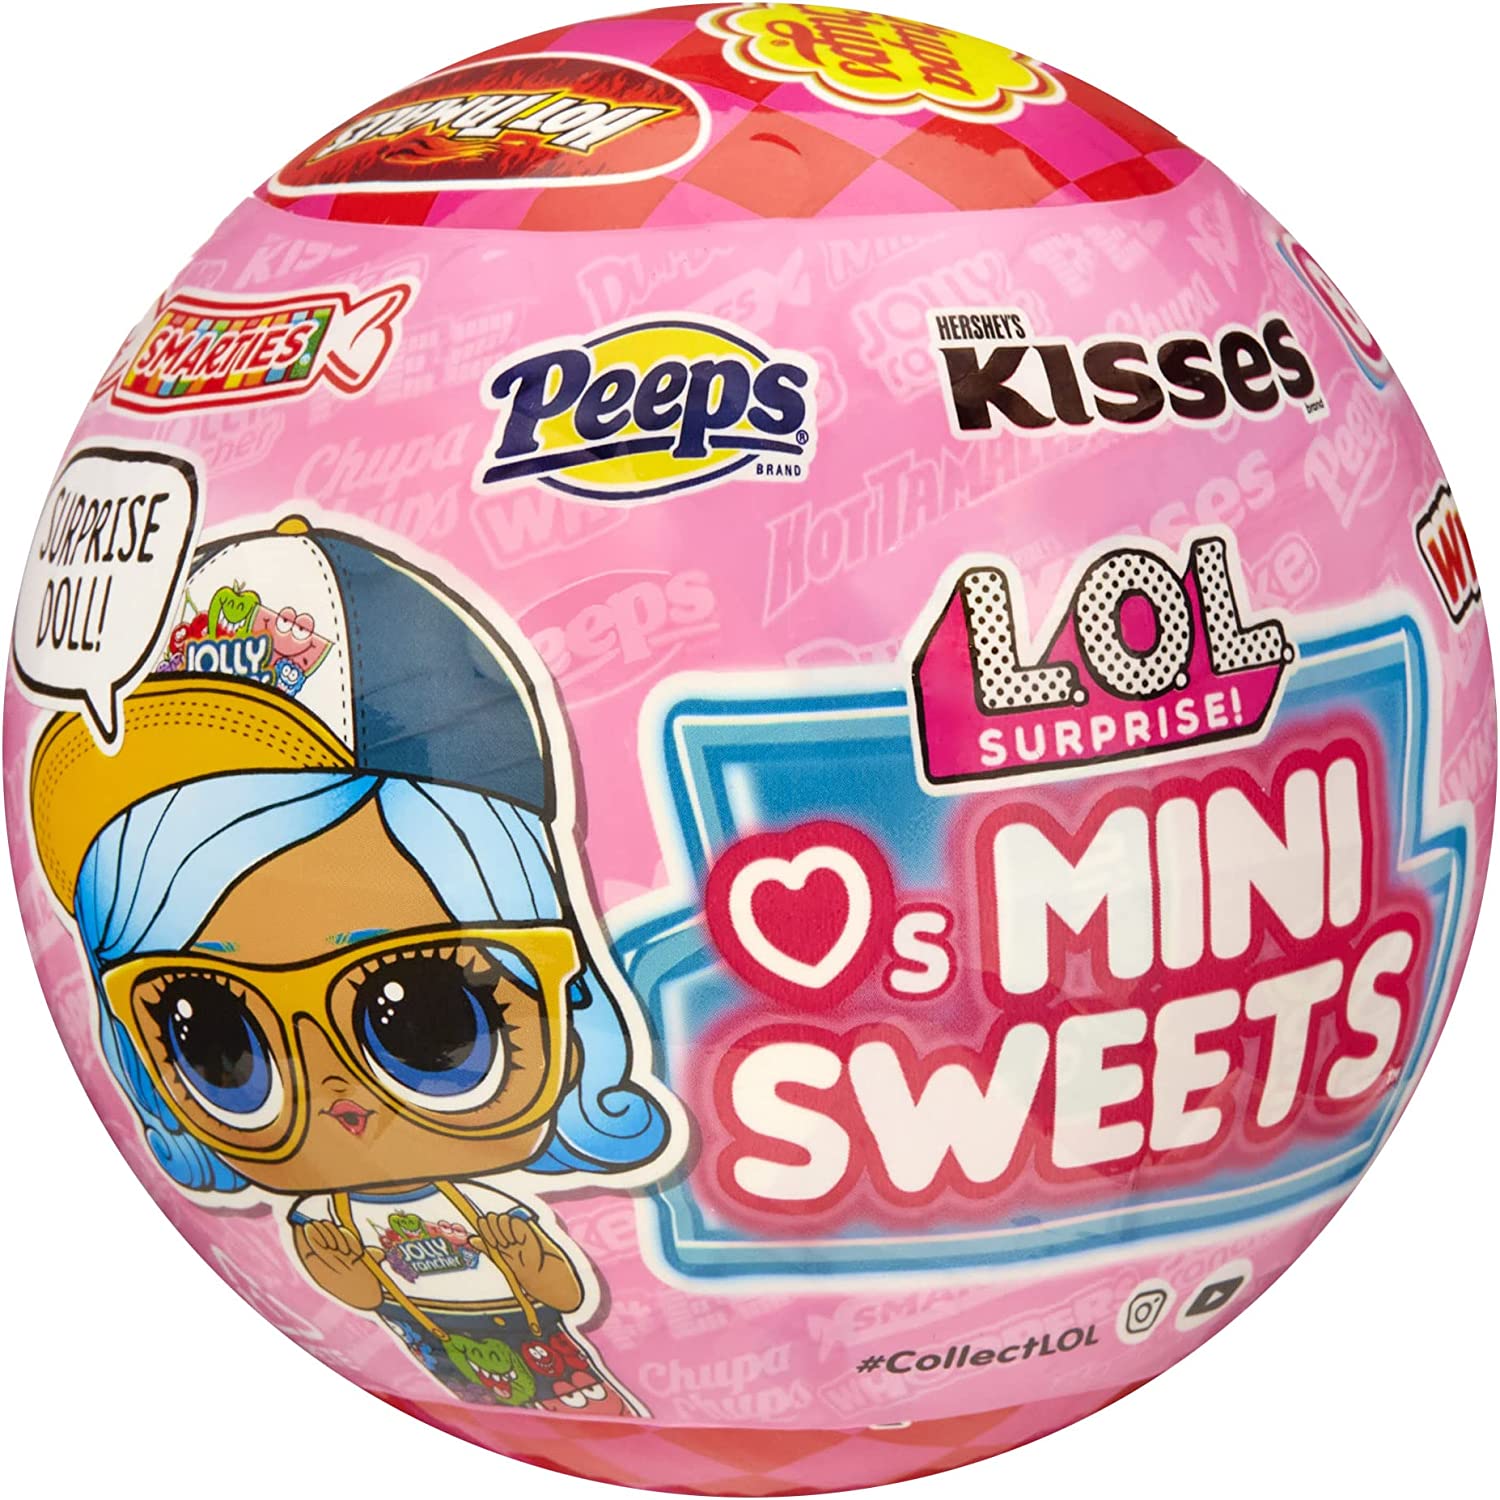 Lol Surprise Loves Mini Sweets Dolls In Style Of Famous Candies Kisses